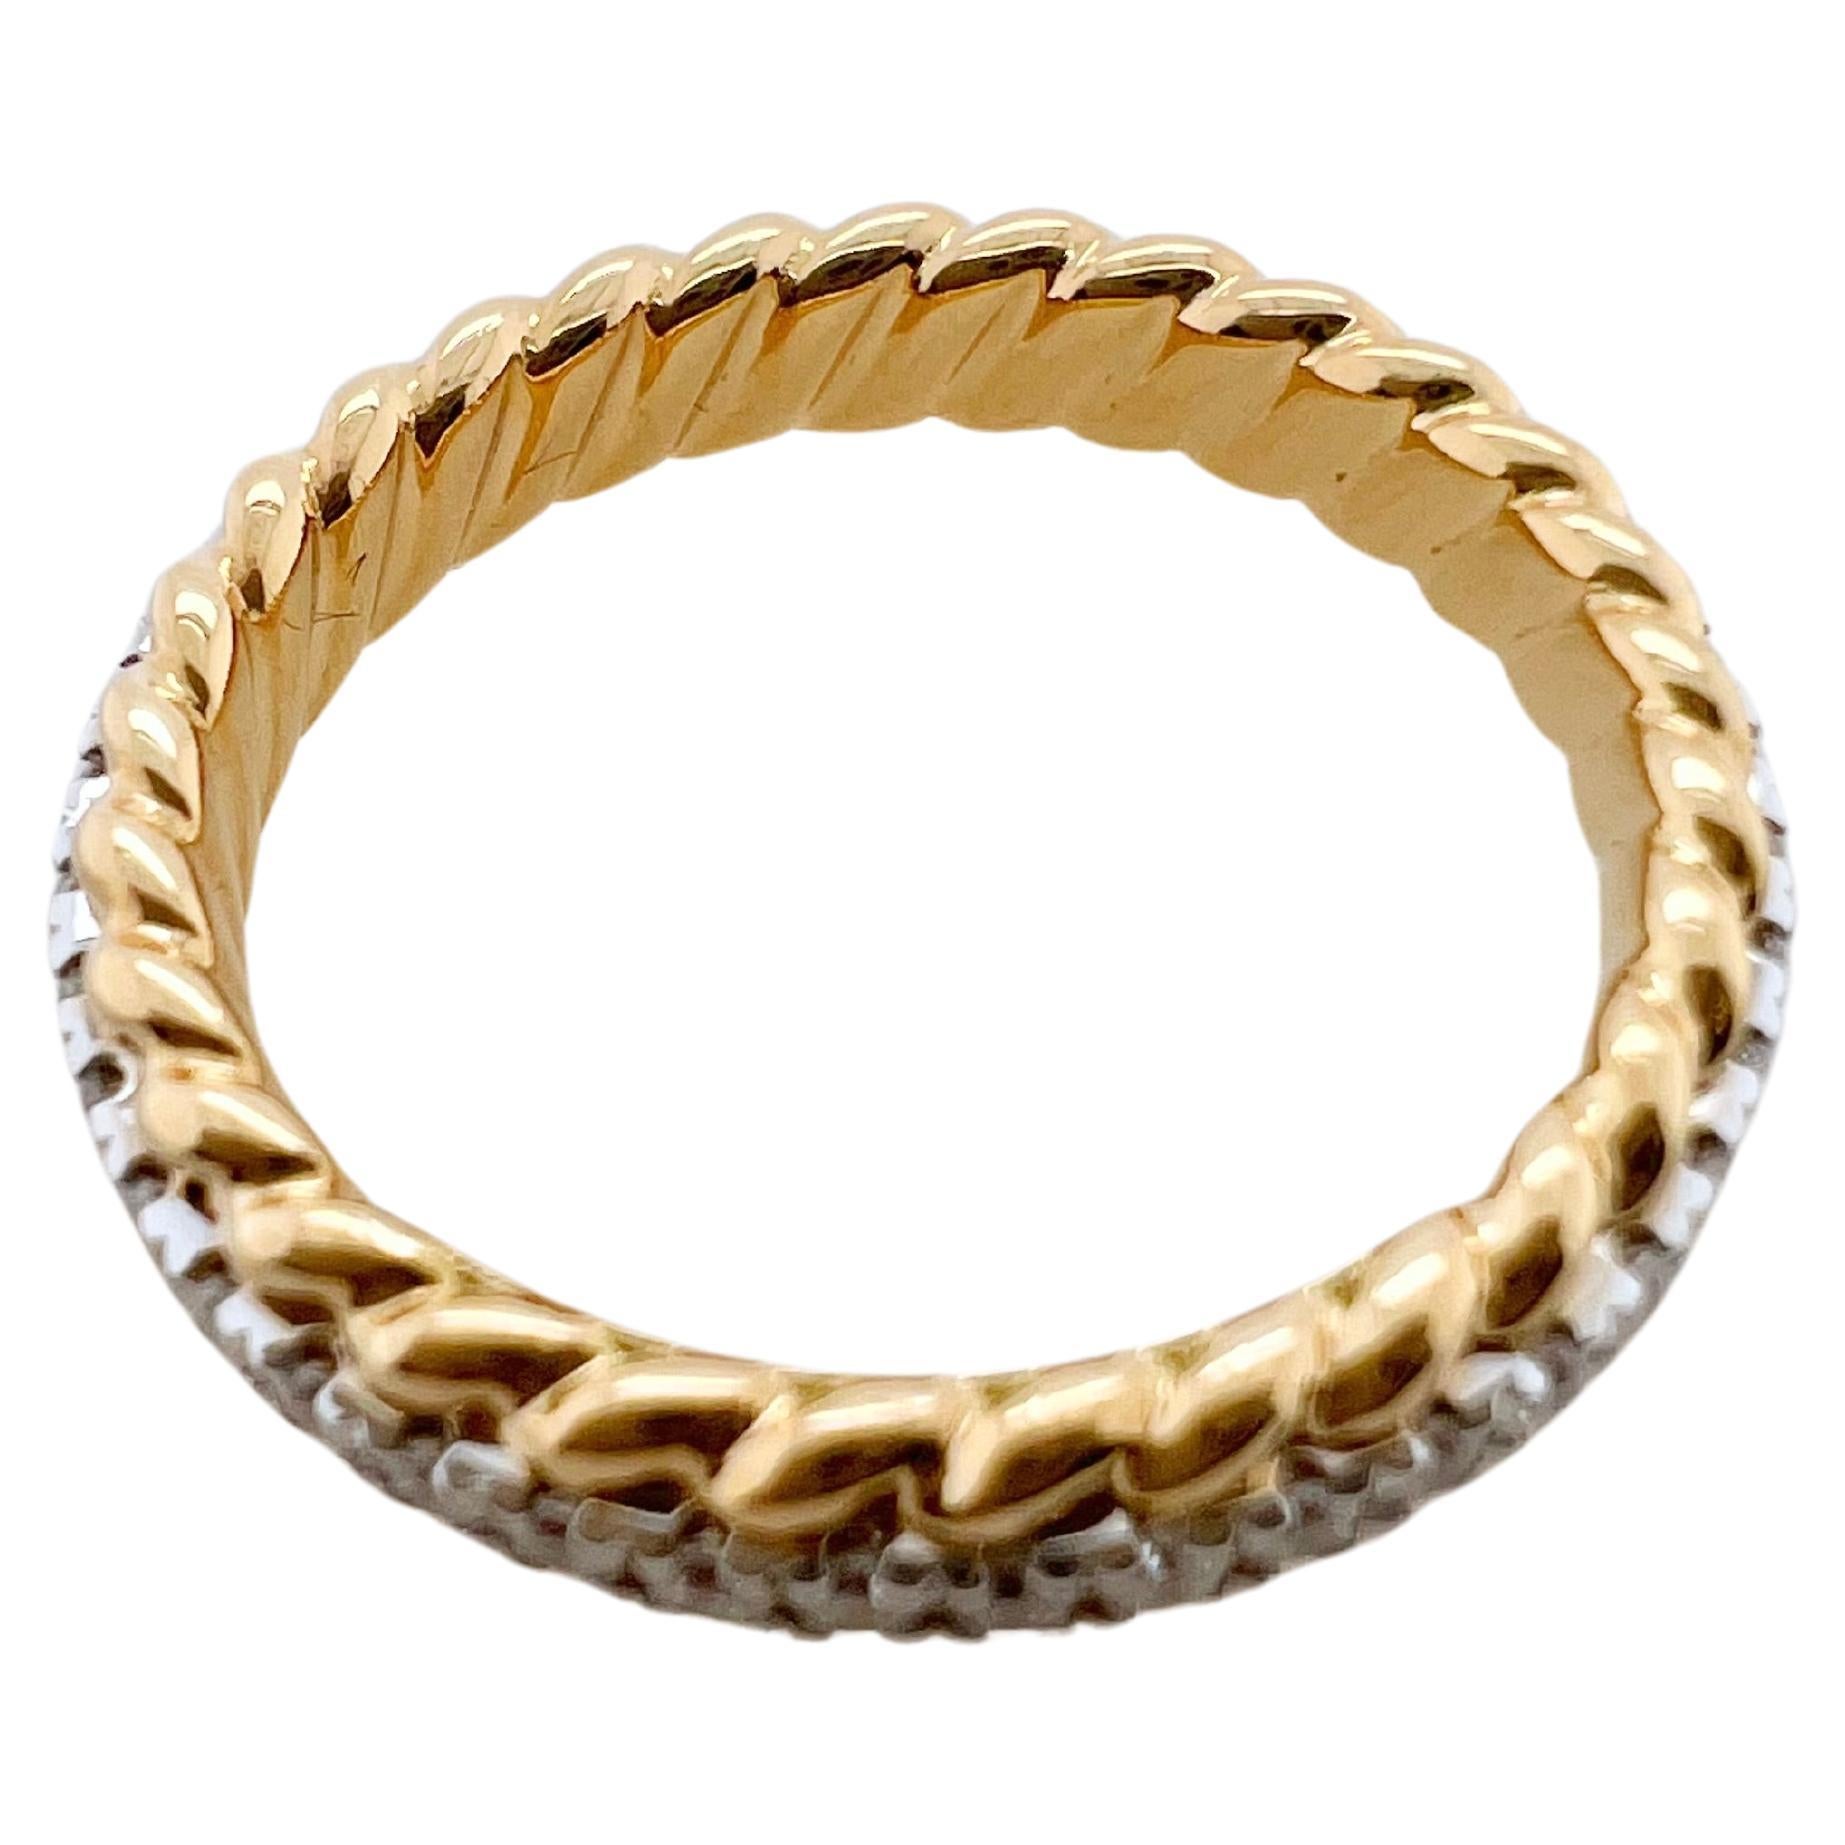 This amazing band will be your go to favorites.  This individual band is made in 18k yellow gold with round brilliant diamonds prong set.  The outer edges have a unique rope style trim that give texture and character.  The solid gold is made sturdy